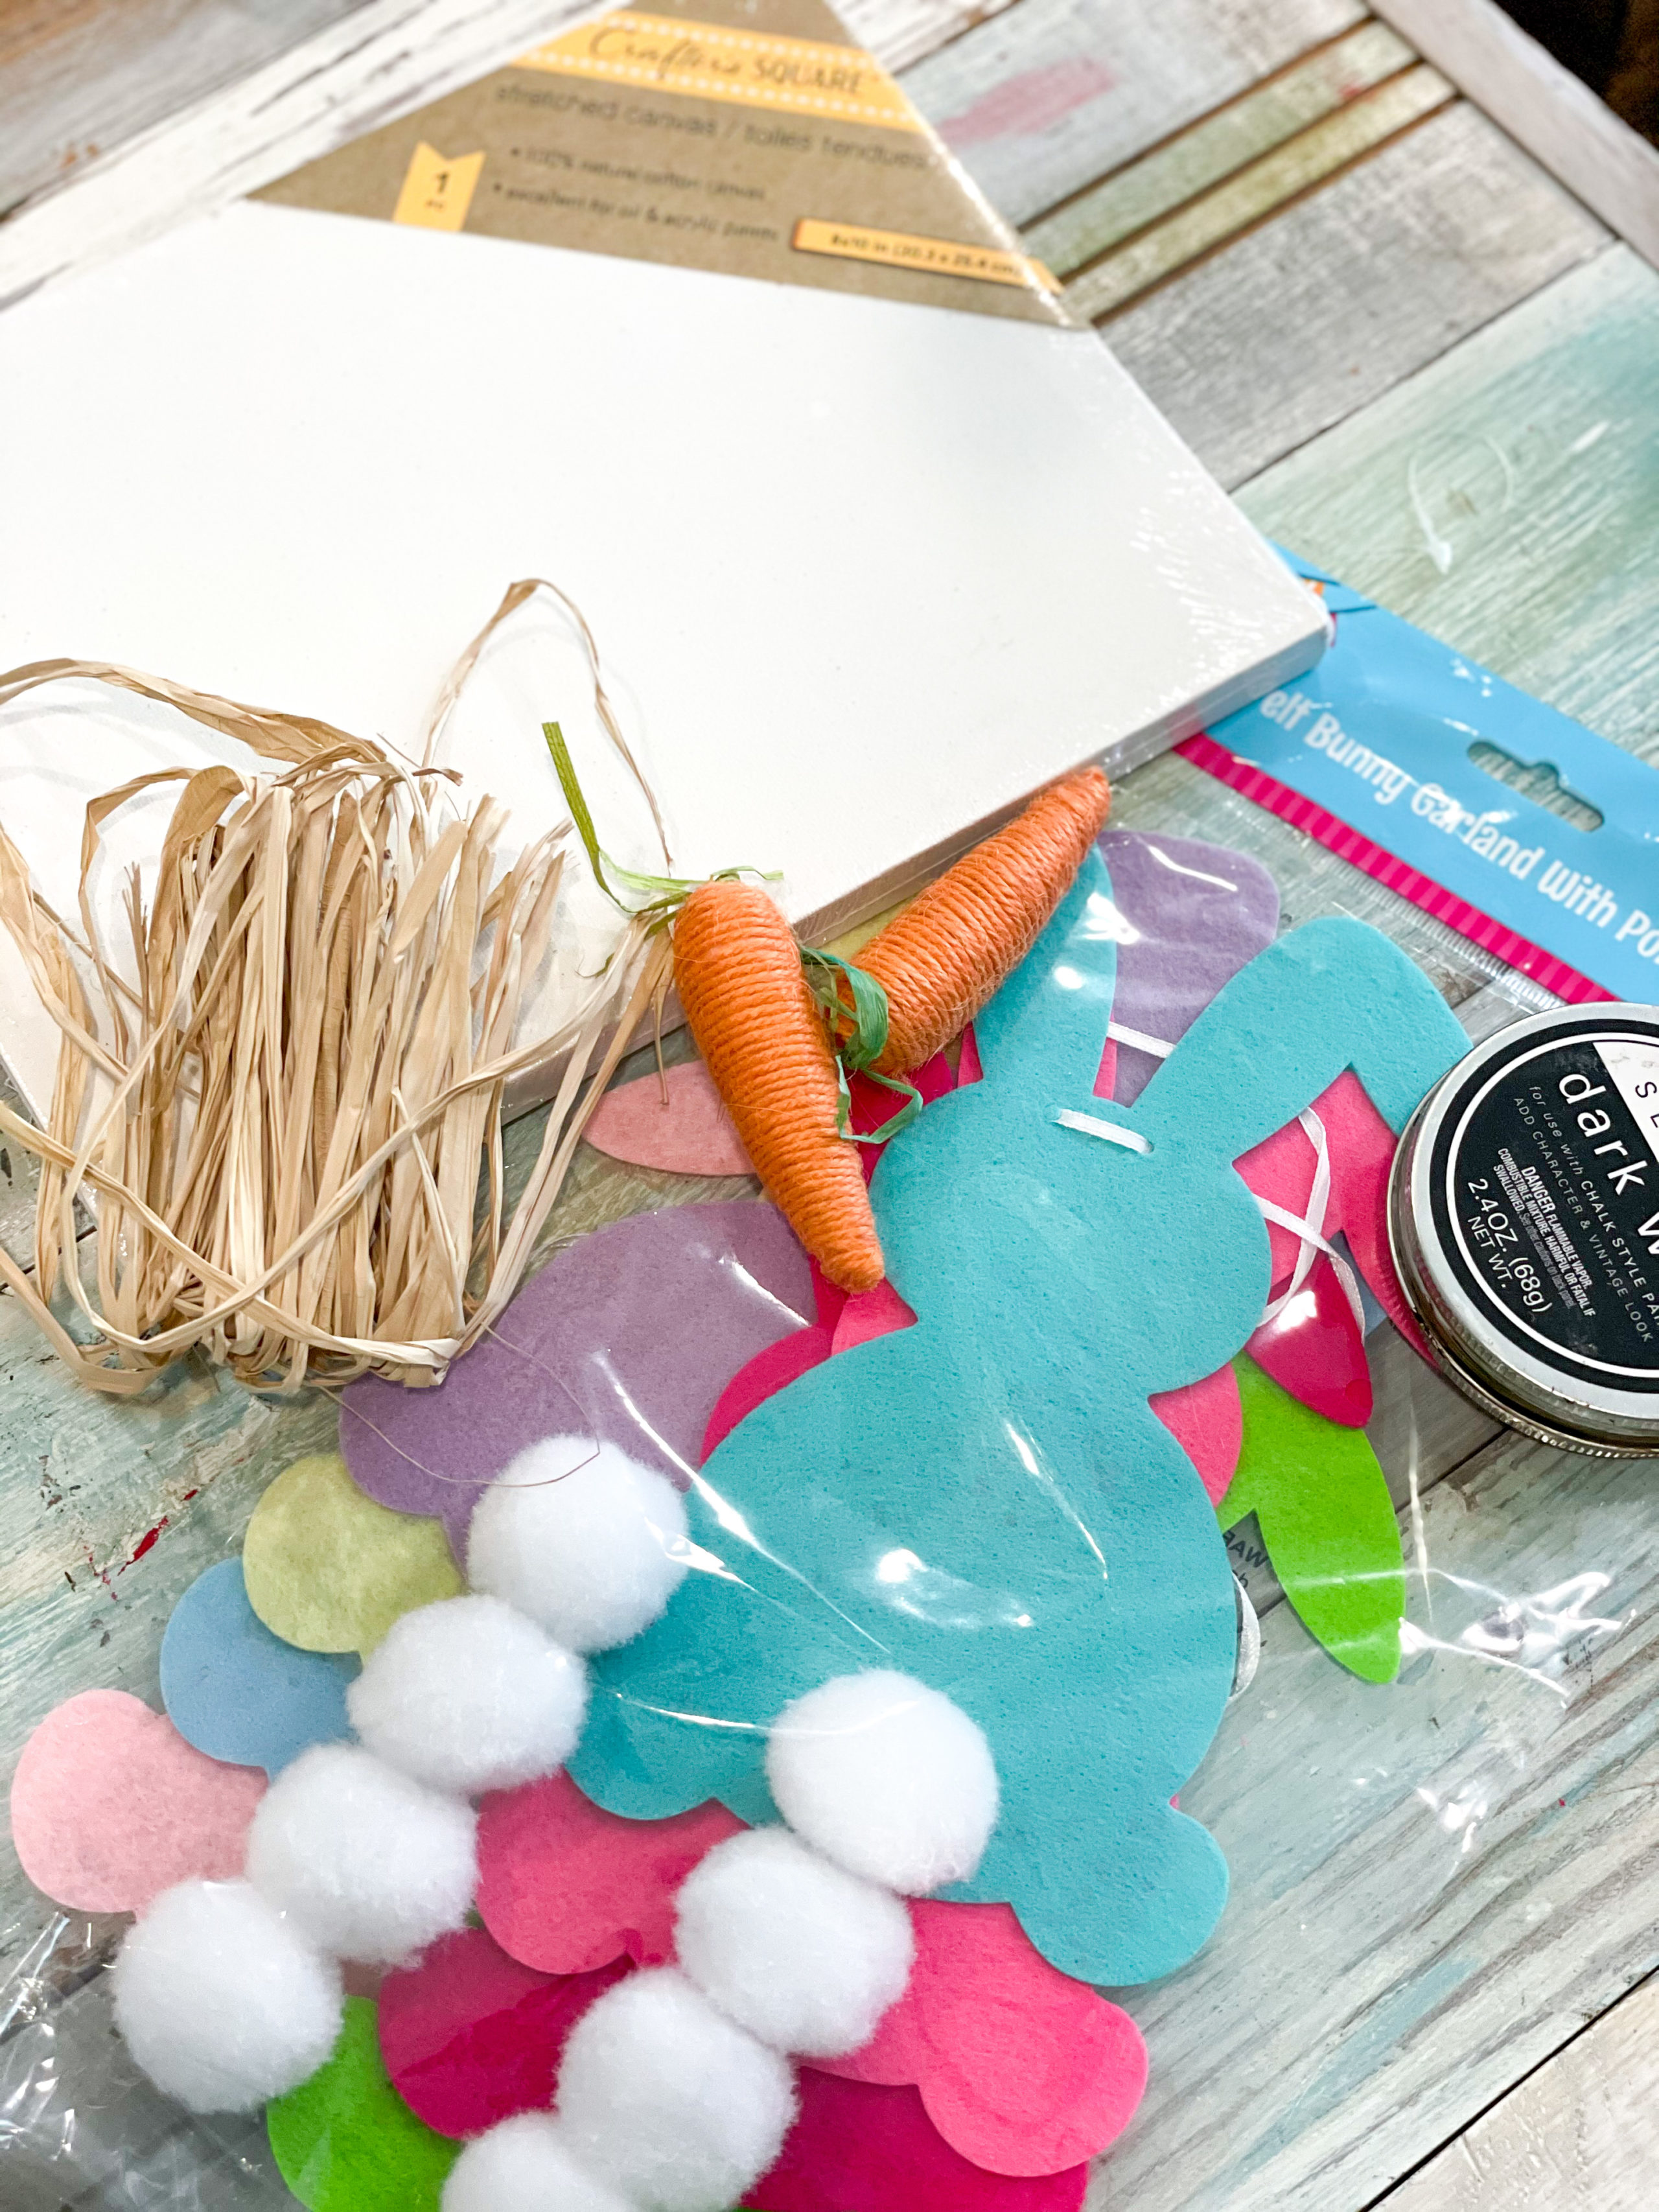 Carrot Reverse Canvas - a Dollar Store Spring Craft